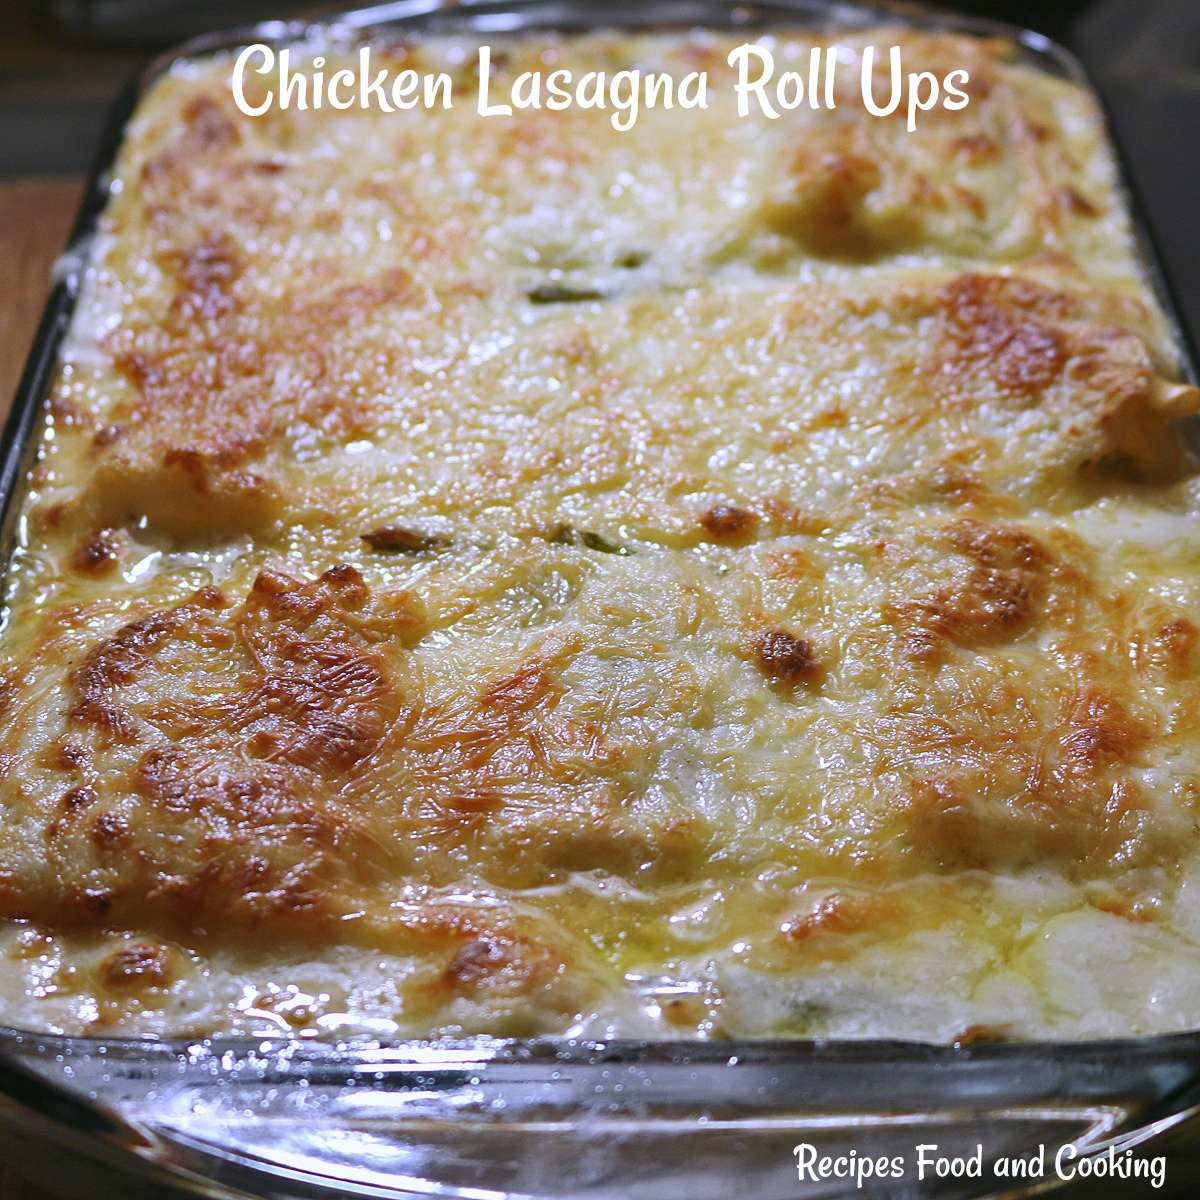 Chicken Lasagna Roll Ups with Asparagus